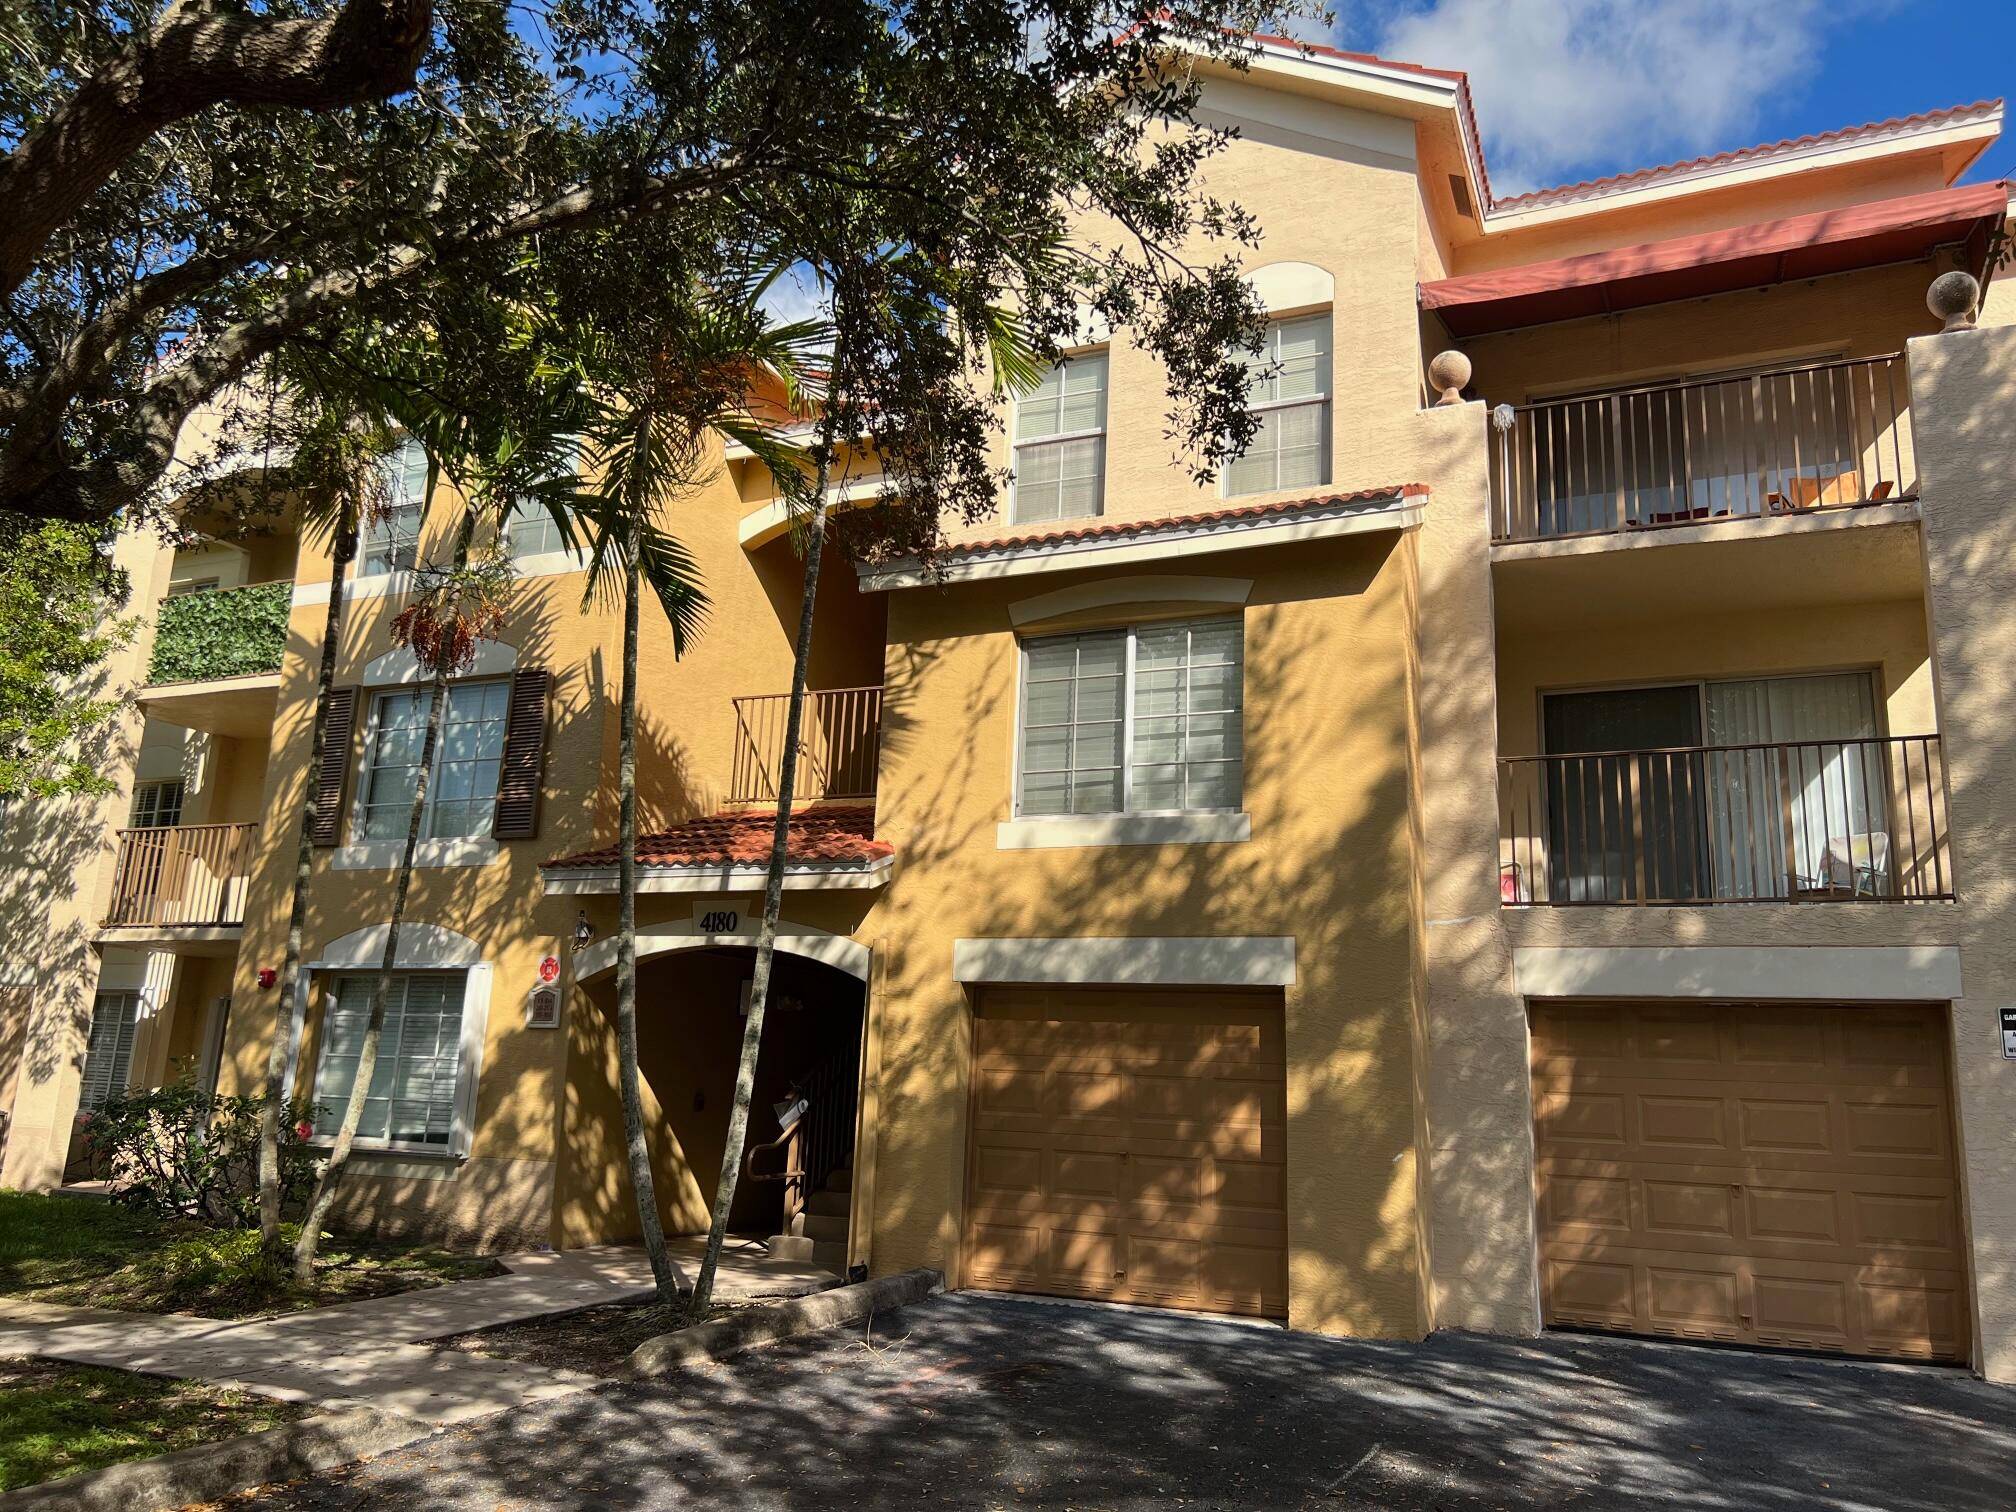 Upgrades incl. tiled balcony with beautiful exterior porcelain tiles, granite countertops, crown molding throughout, freshly painted 03 2023, all sinks and bathtubs freshly caulked 03 2023, new modern LED cordless ...